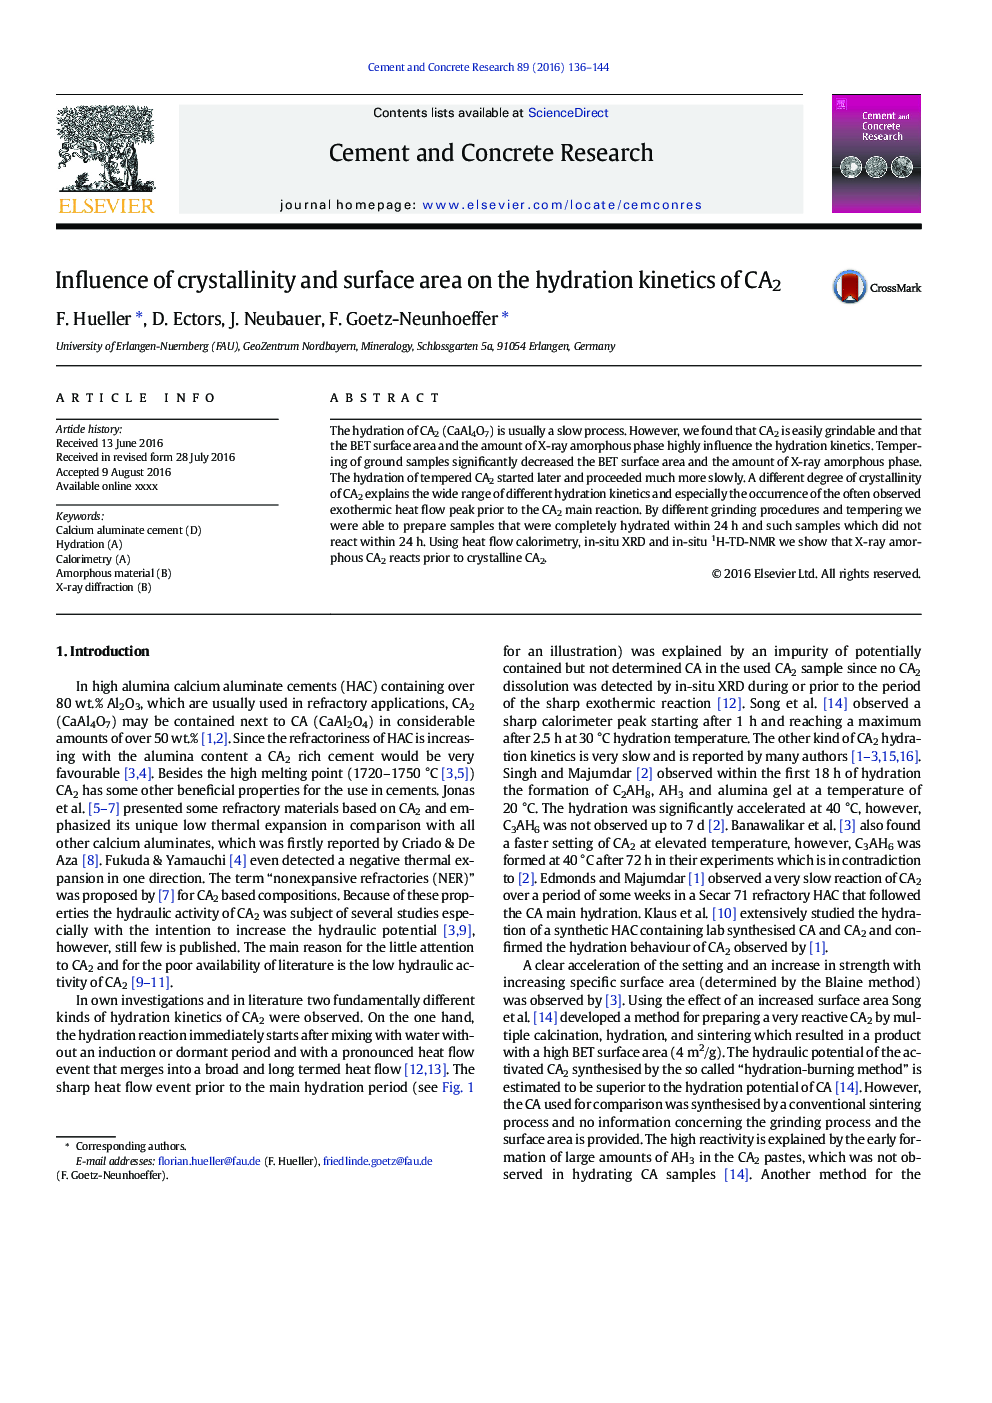 Influence of crystallinity and surface area on the hydration kinetics of CA2